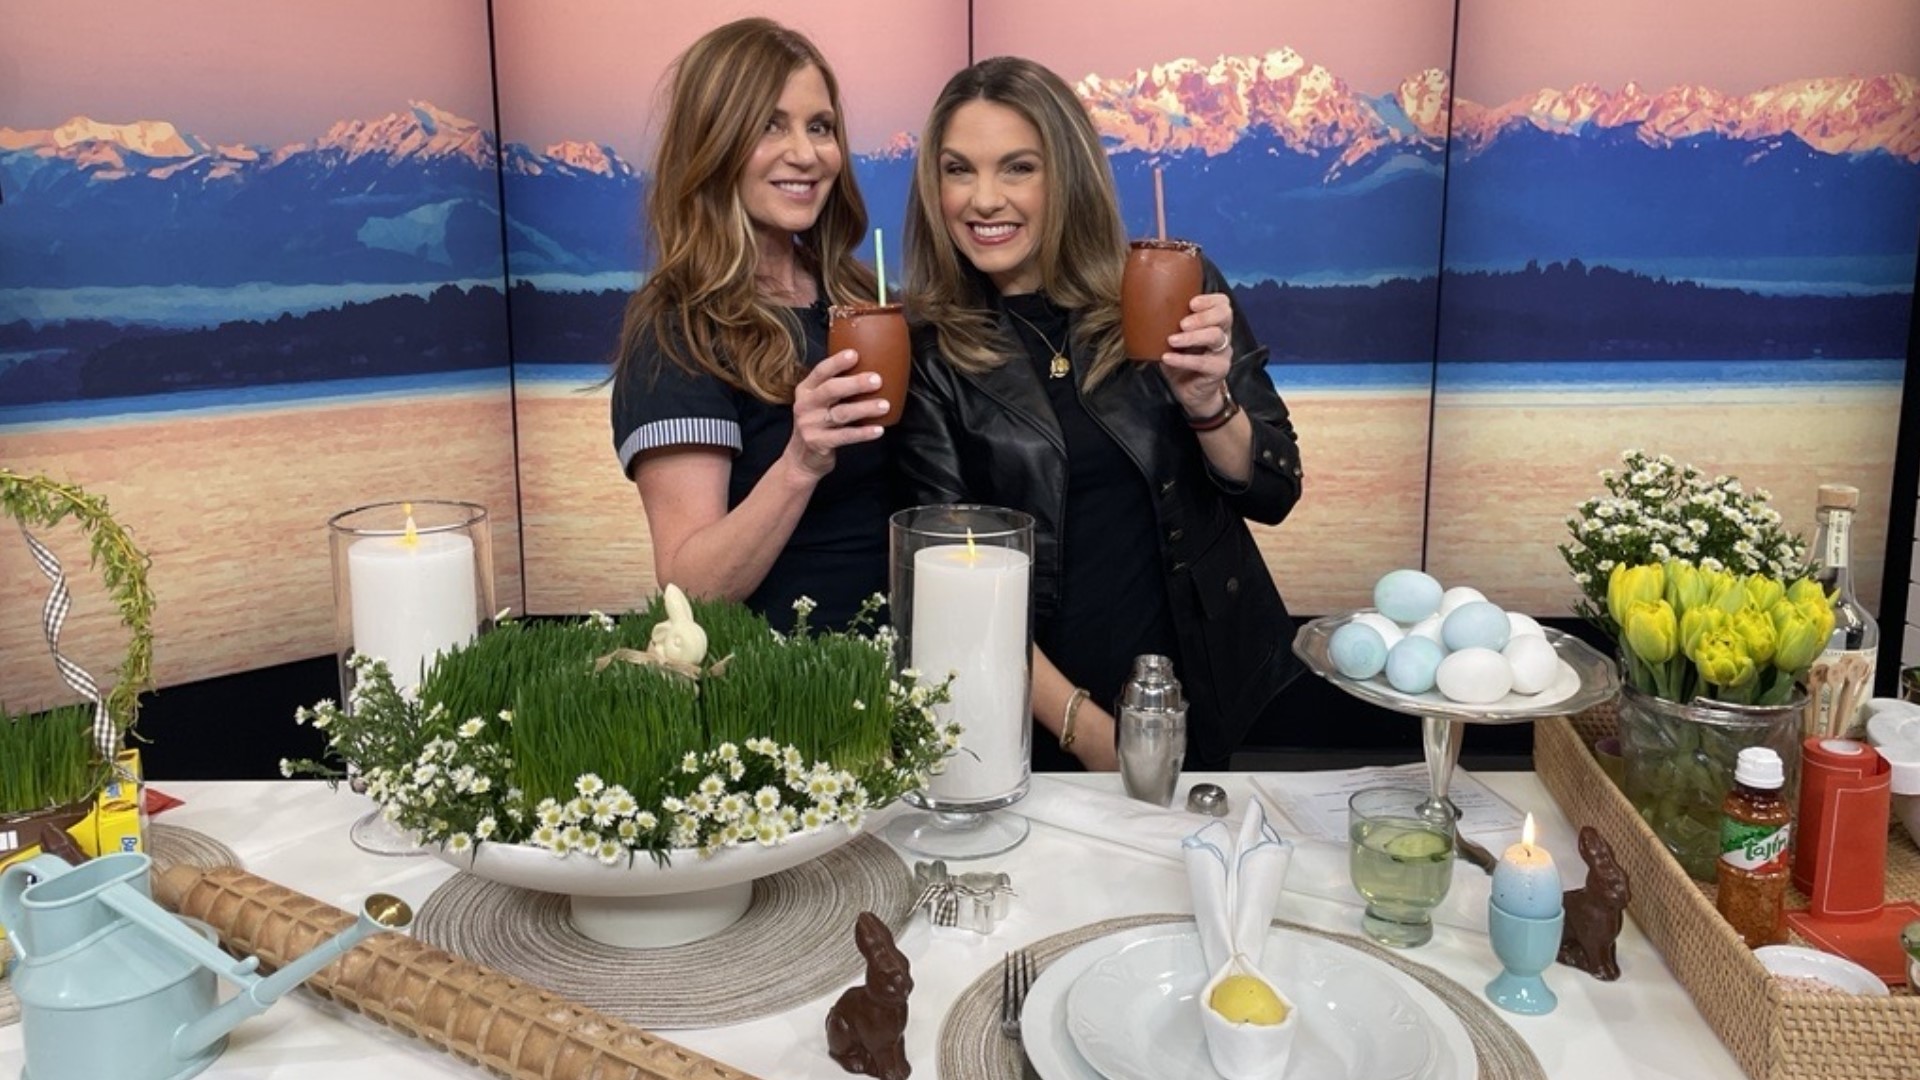 425 Magazine lifestyle contributor Monica Hart uses lots of nature's bounty and a healthy amount of sugar to set this Easter table. #newdaynw